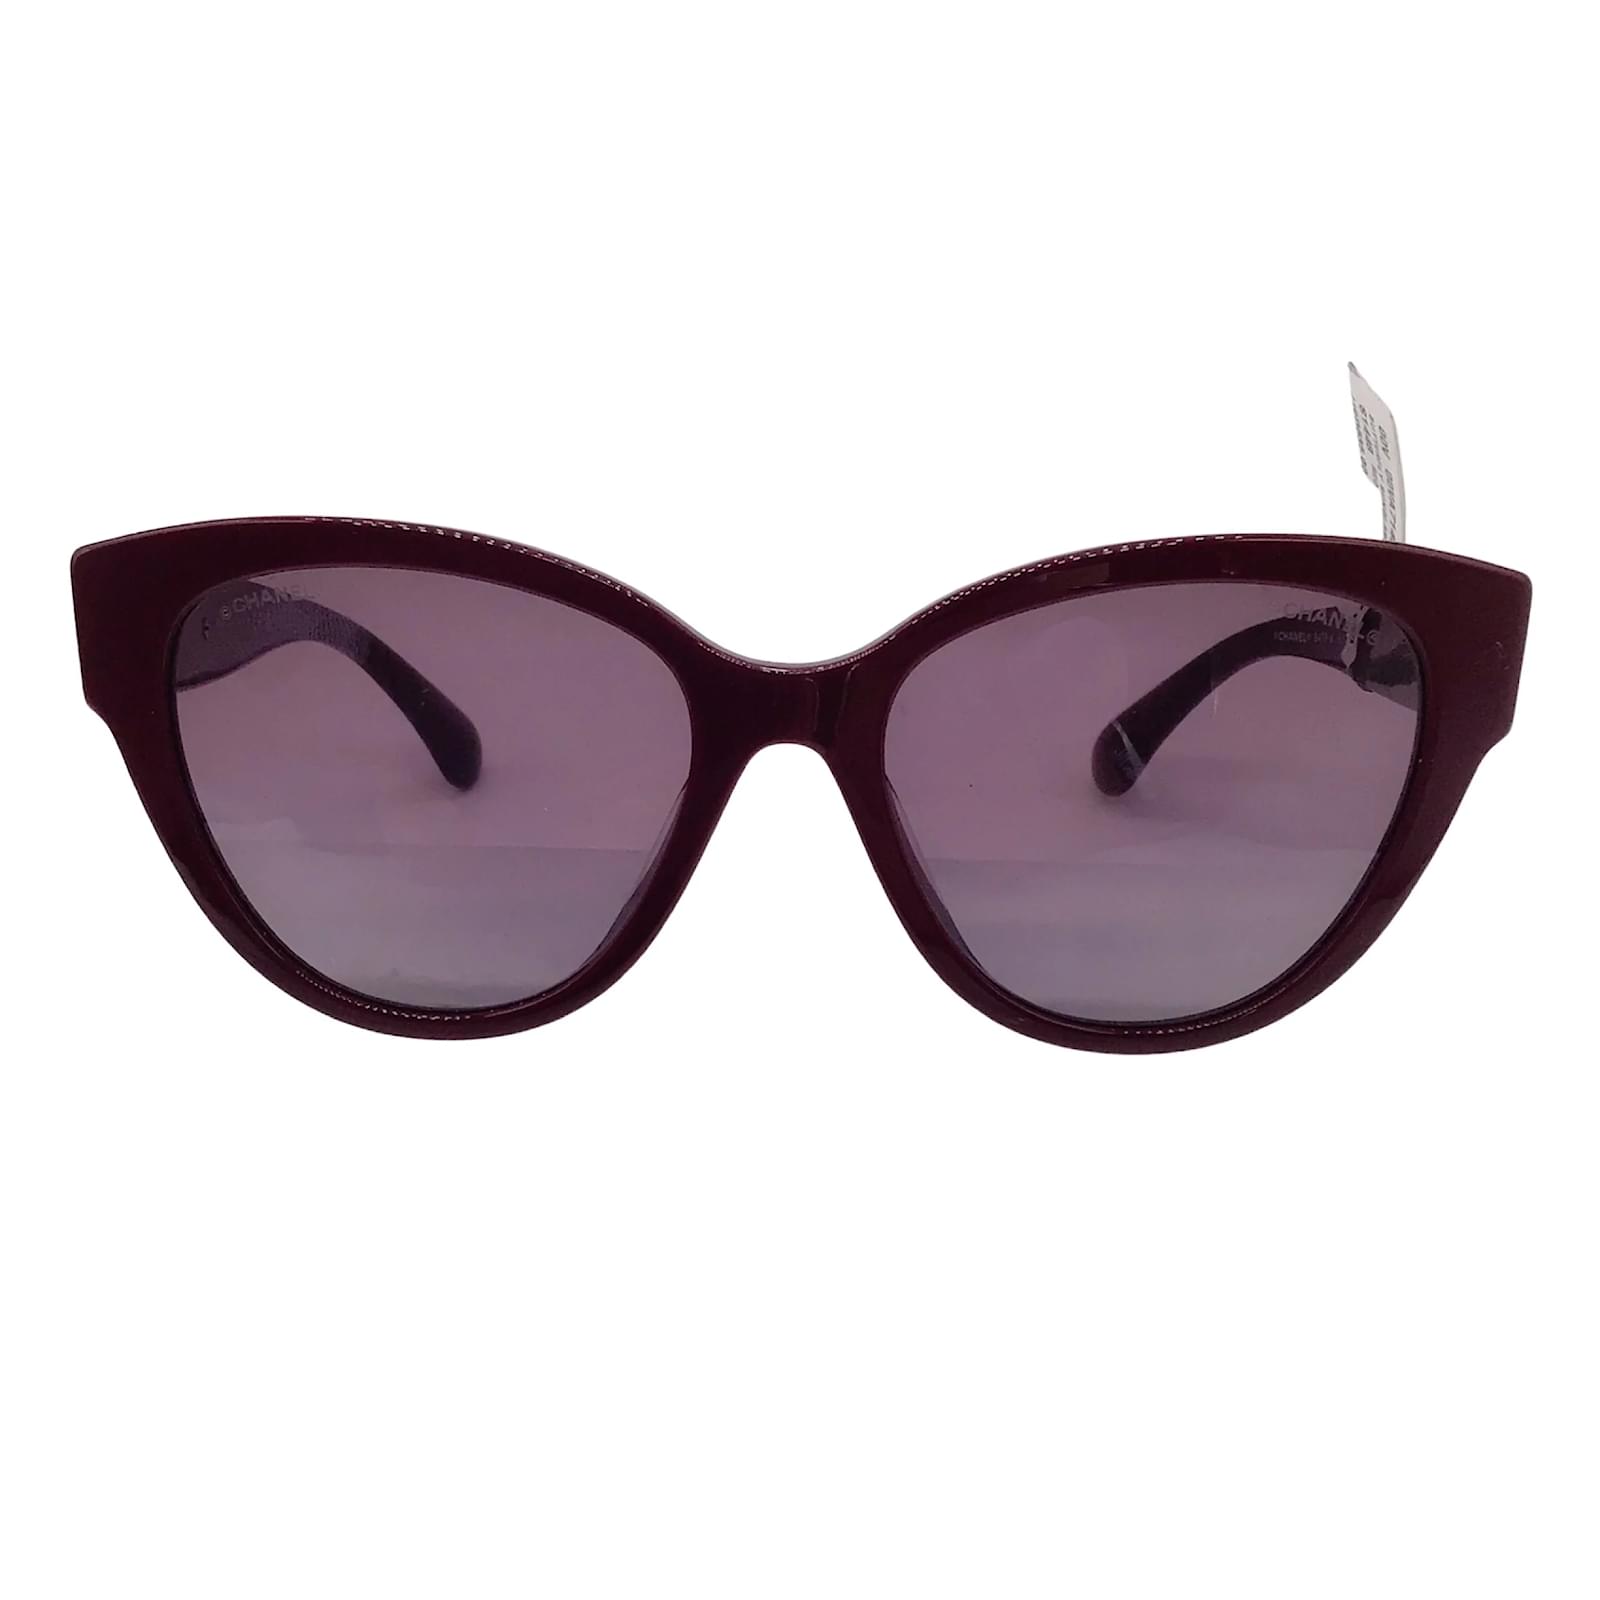 Sunglasses Chanel Chanel Burgundy CC Logo Pearl Embellished Butterfly Acetate Sunglasses